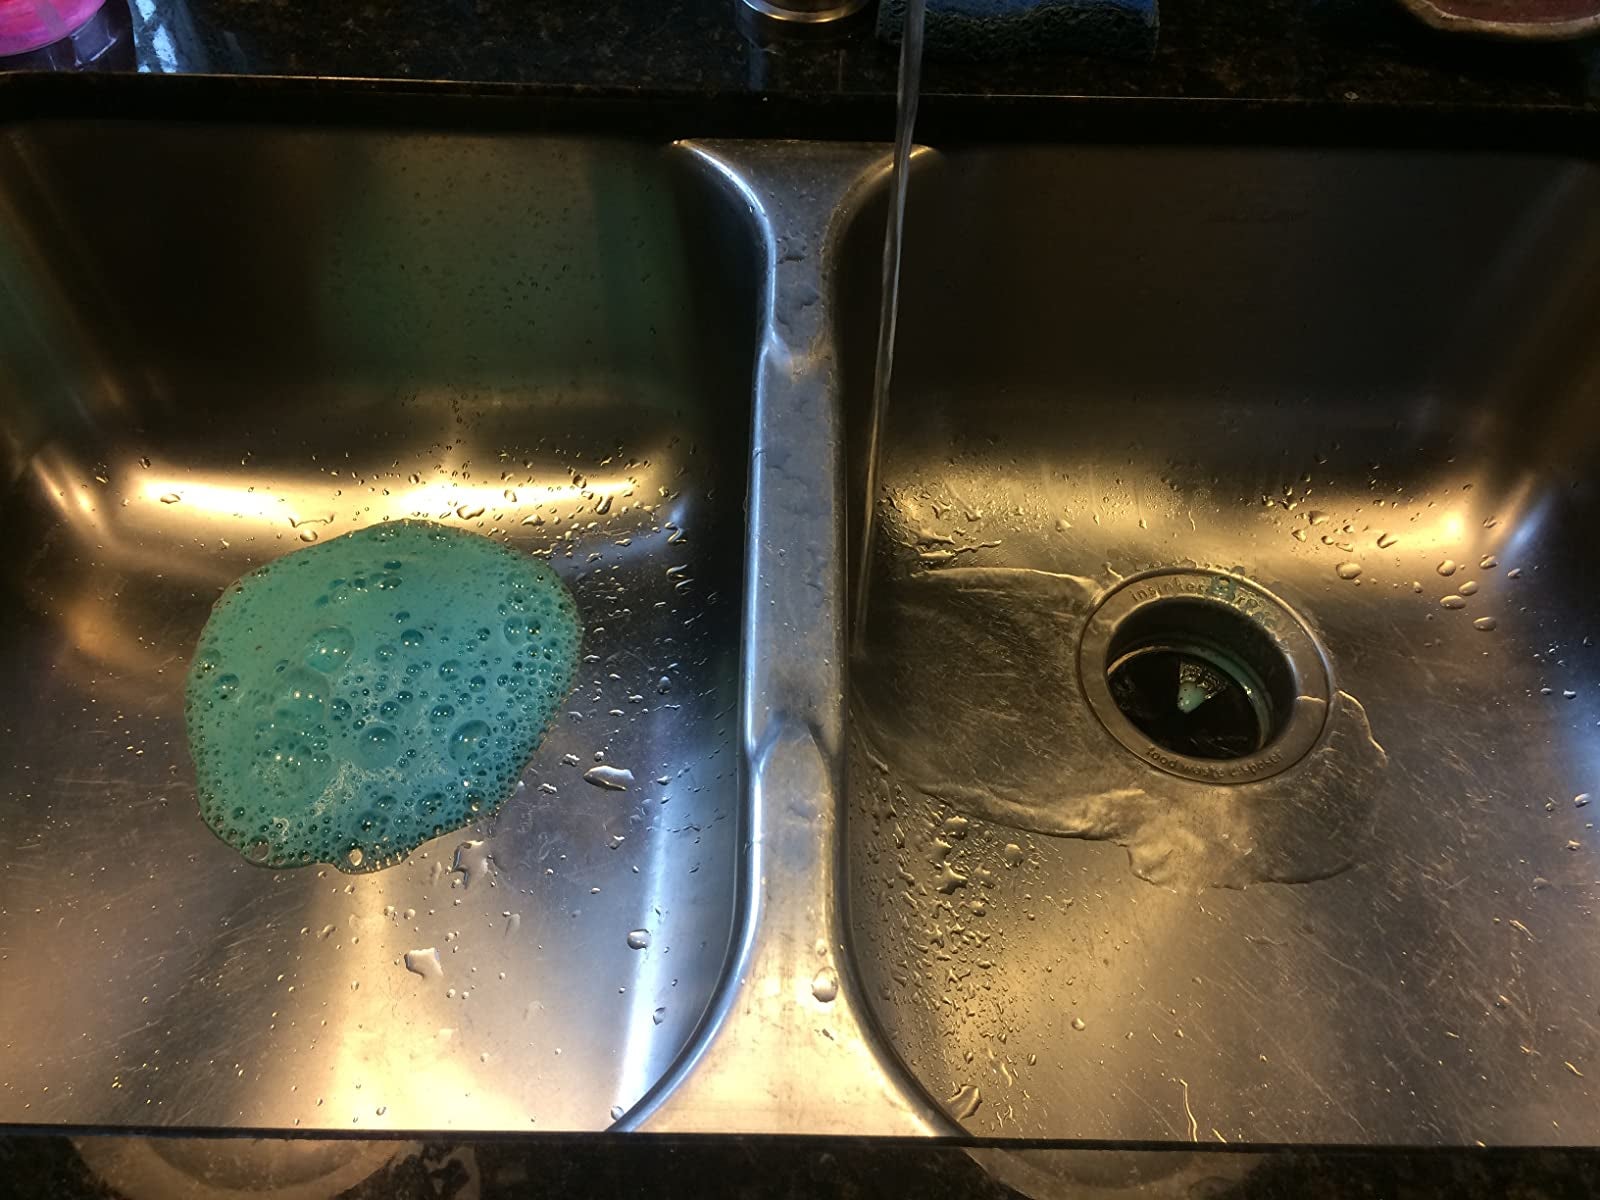 reviewer image of the glisten dishwashing tablet foaming up in the sink